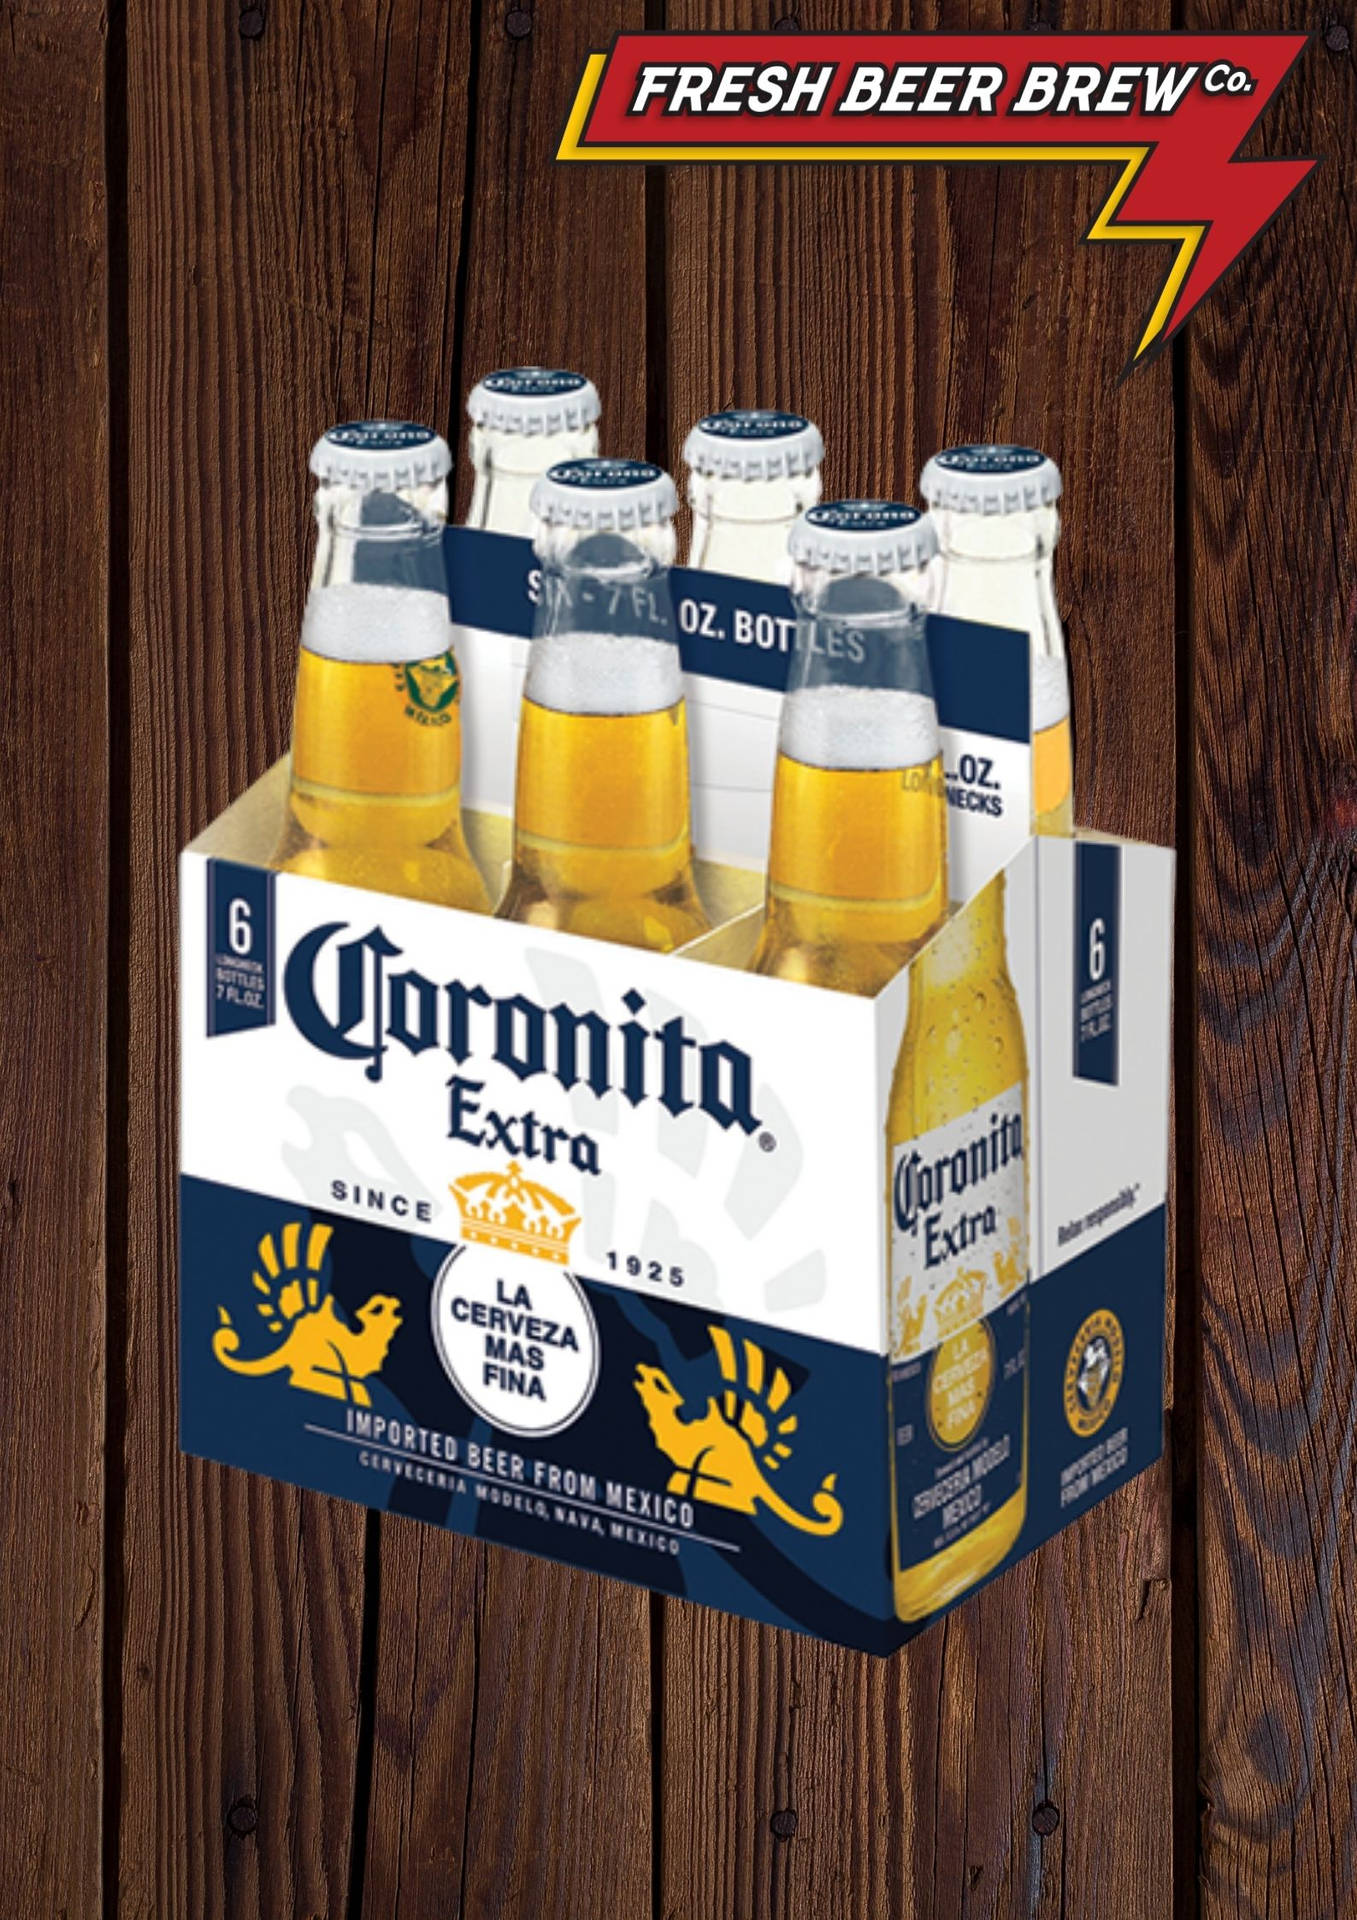 Coronaextra Fresh Beer Brew Poster Would Be Translated To 